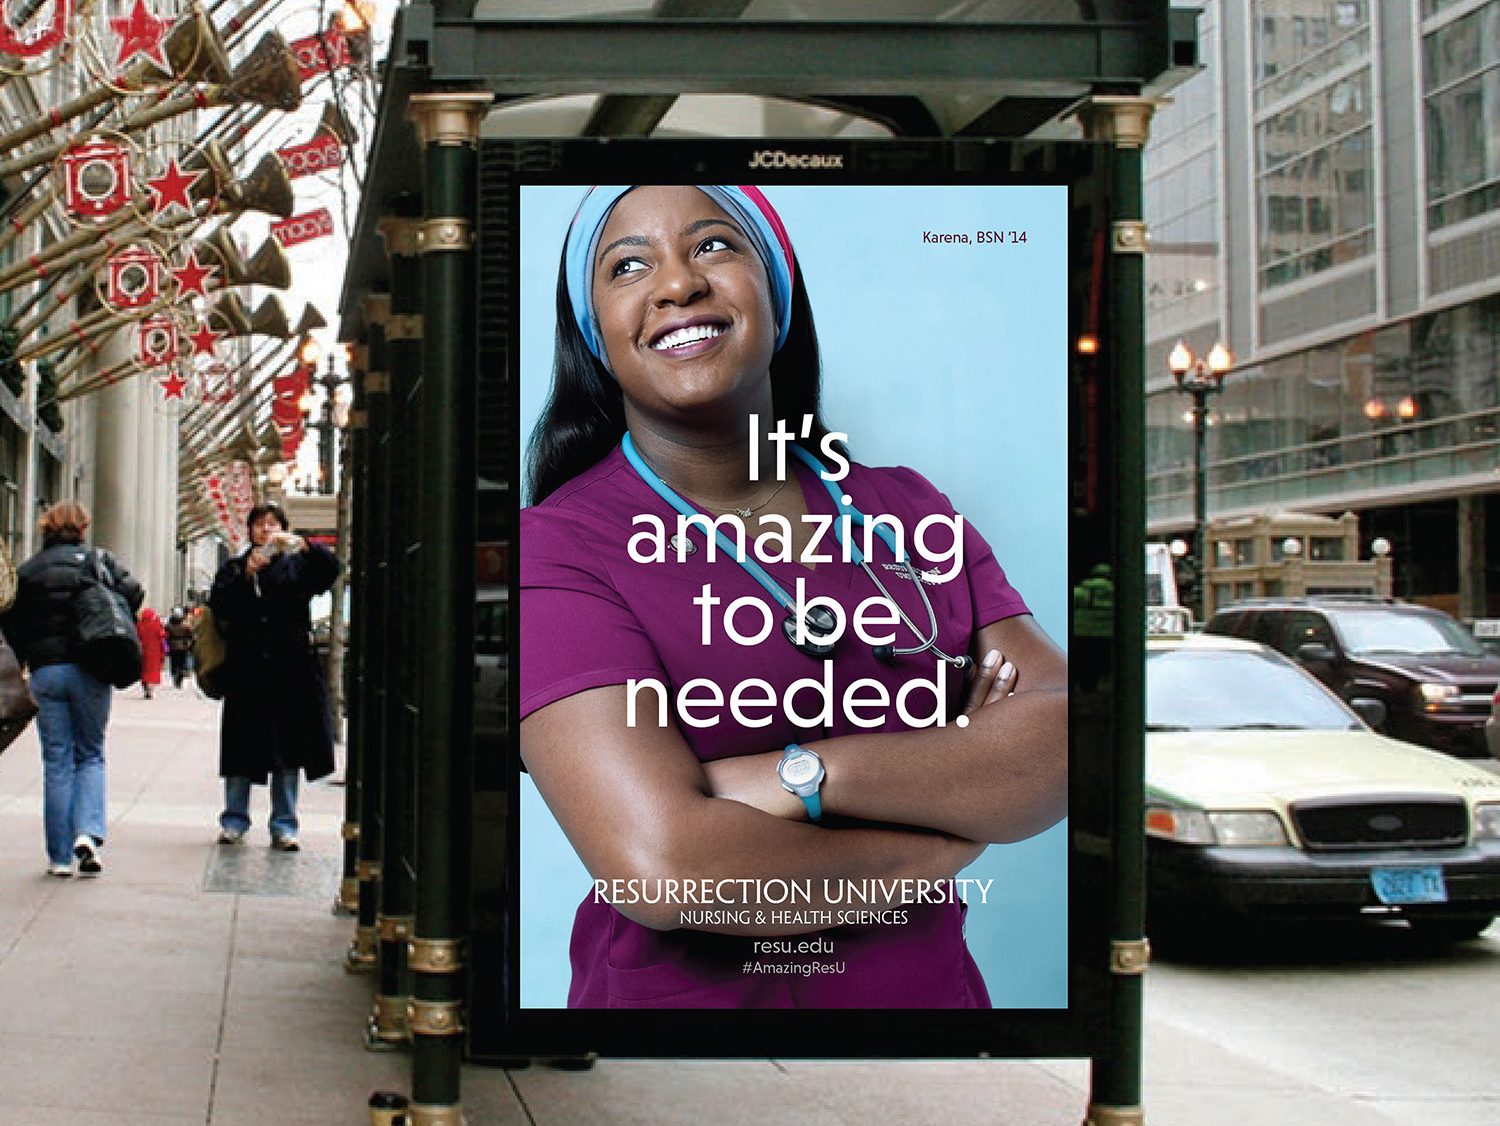 "It's amazing to be needed" creative displayed on a bus stop shelter.